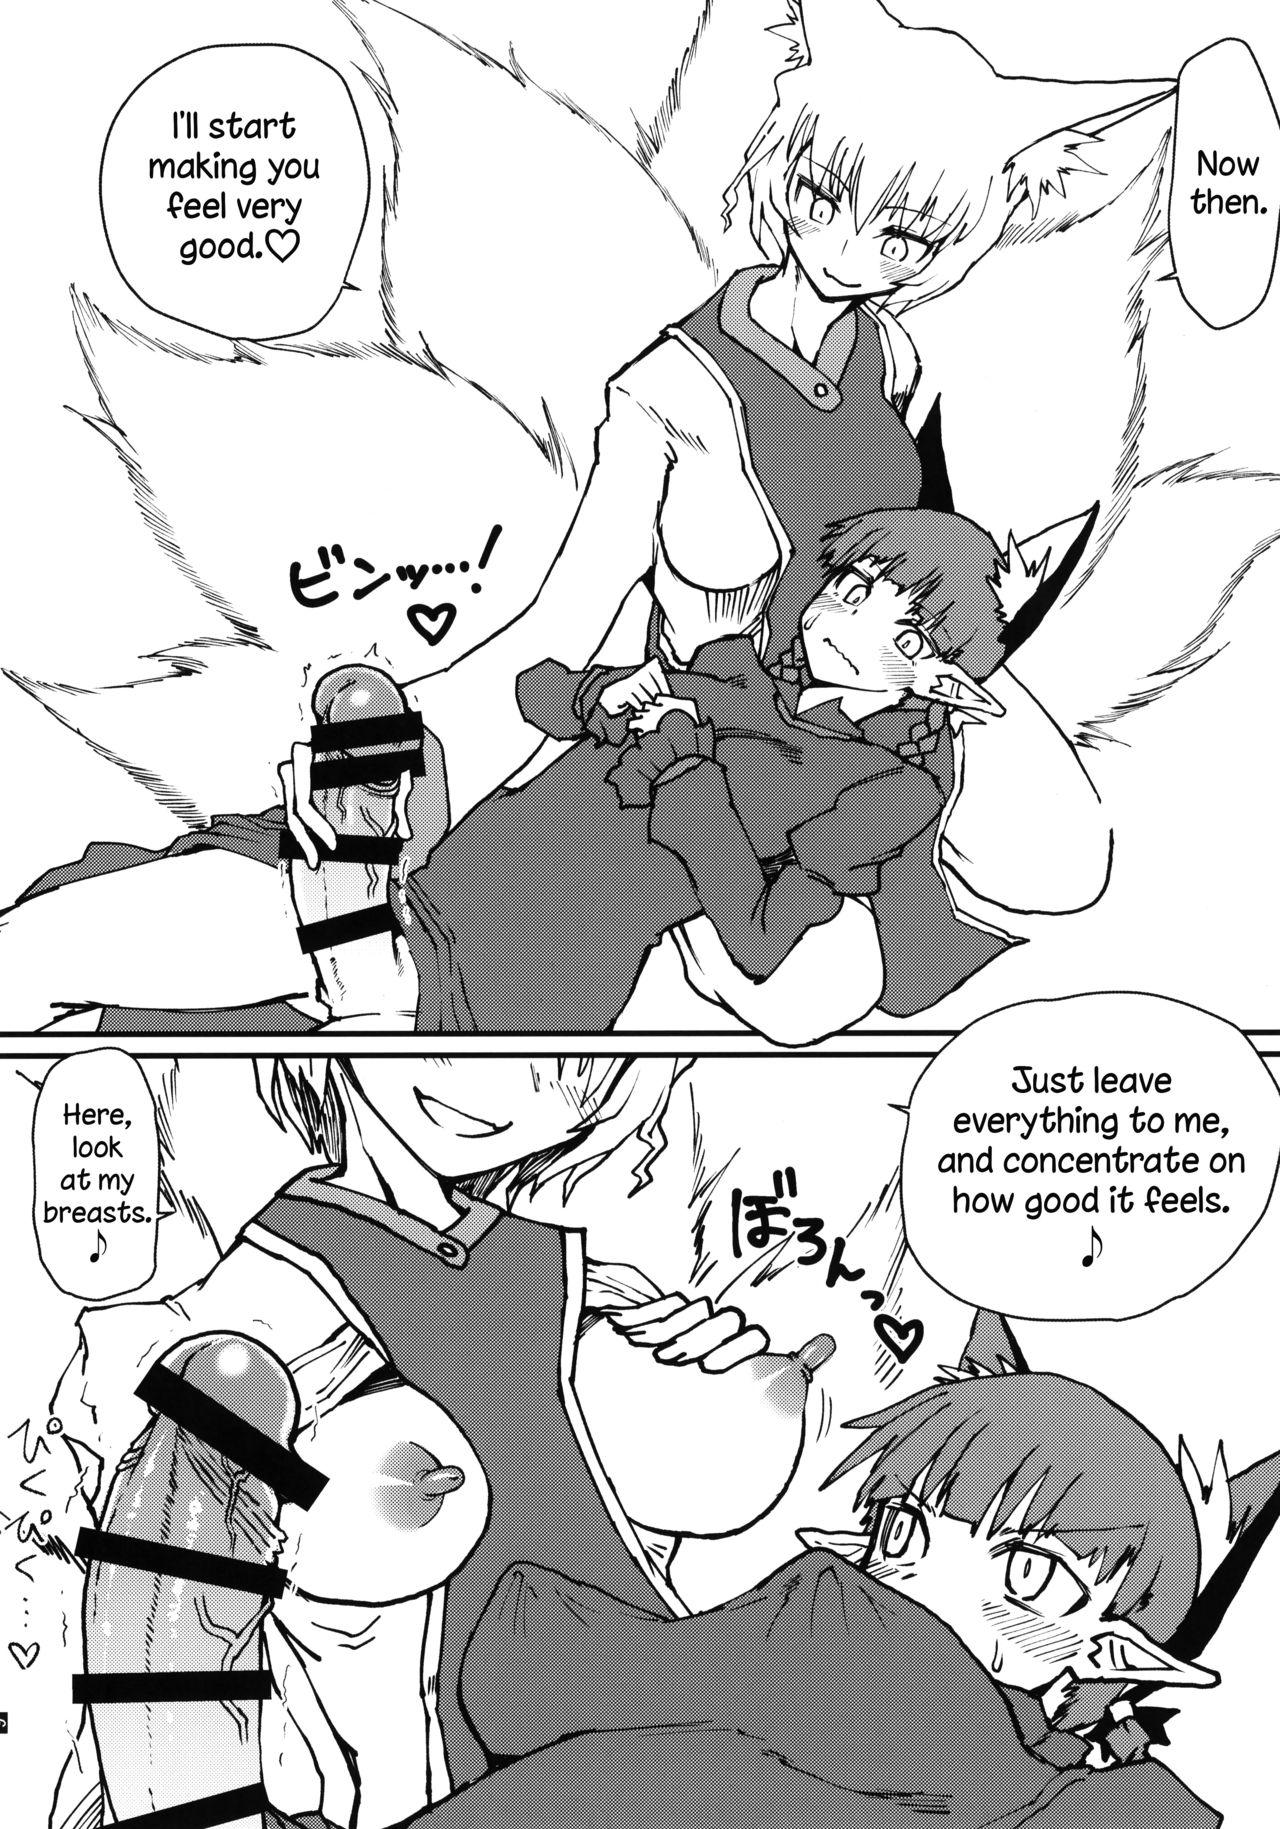 Bedroom Orin-chan o Tappuri Amaesasete Takusan Shasei Sasete Ageru Hon. | A Book Where Orin Gets Spoiled, and Ejaculates Many Times. - Touhou project Real Amature Porn - Page 7